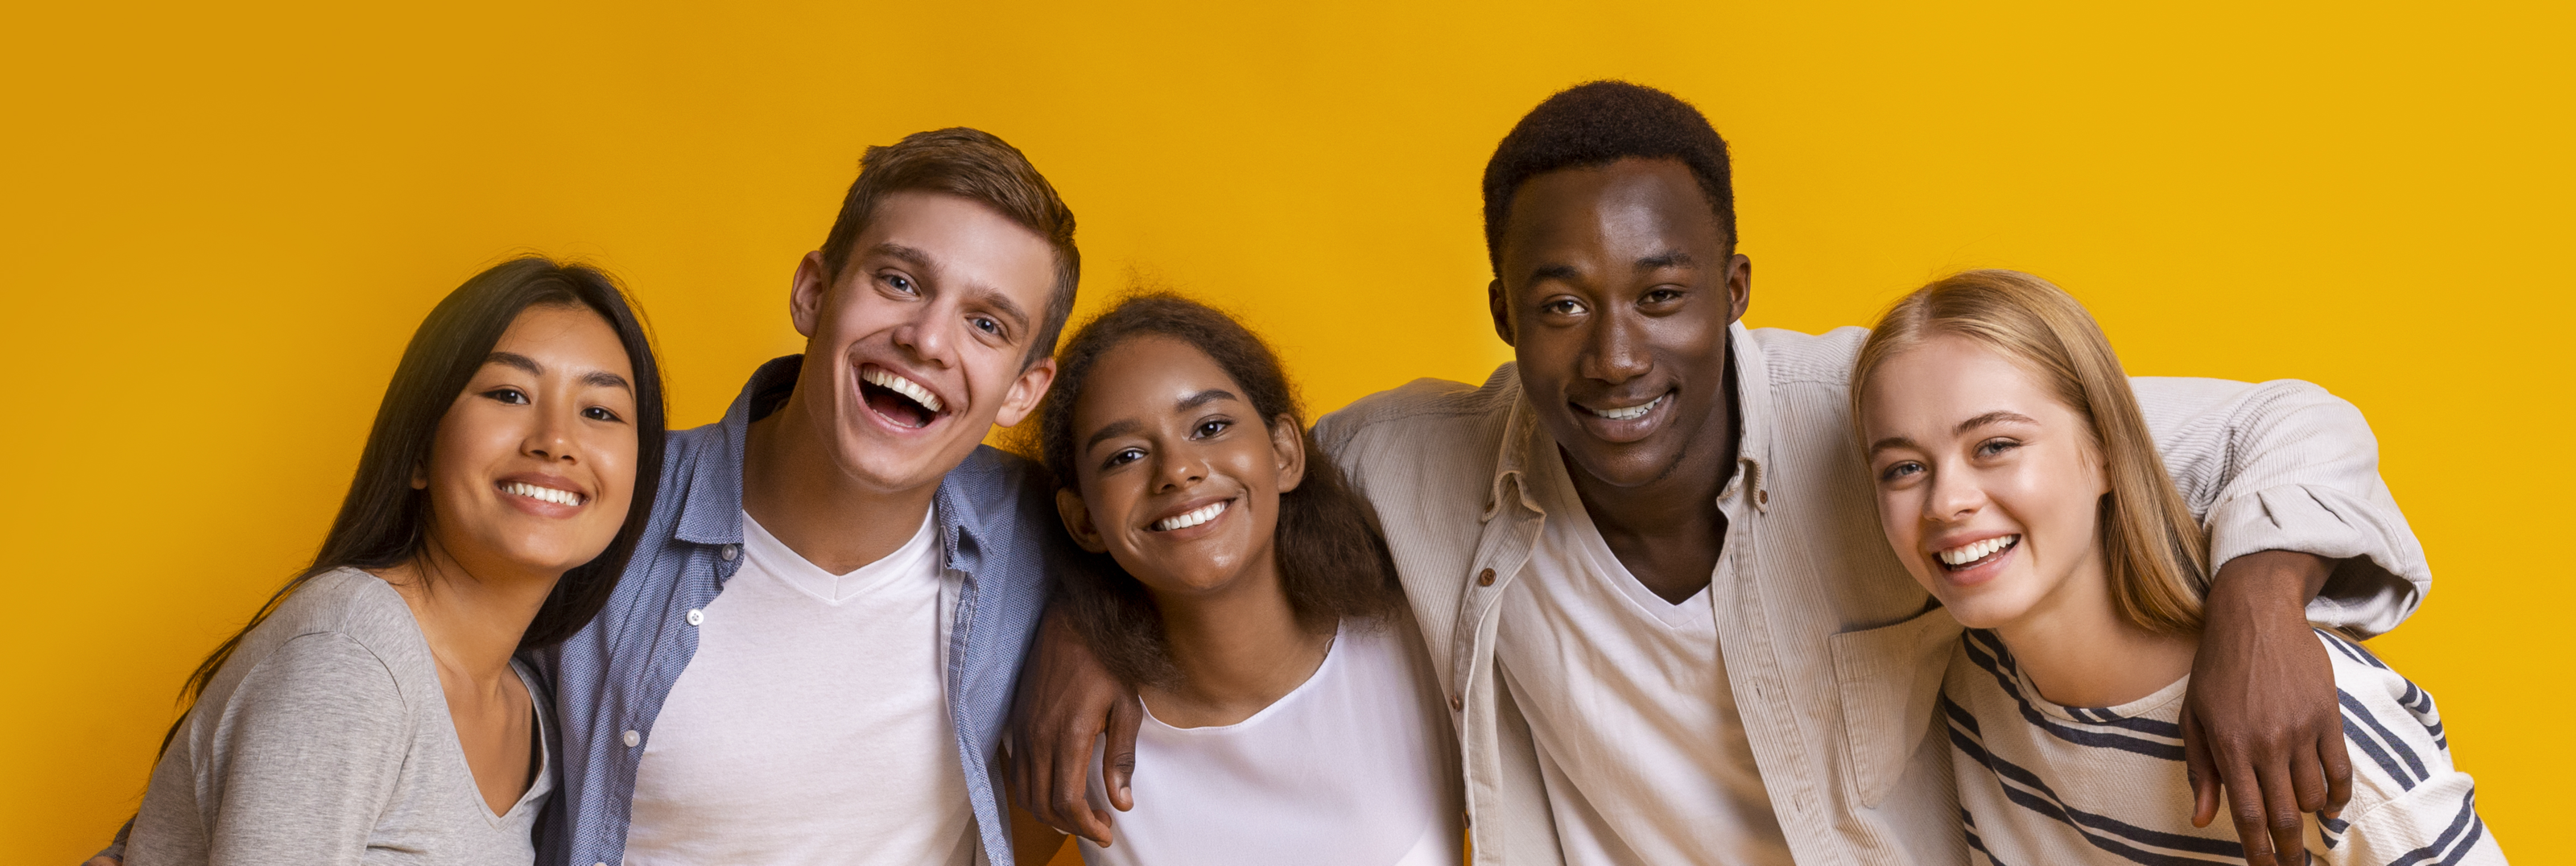 Friendly group of multiethnic students embracing and smiling over yellow background